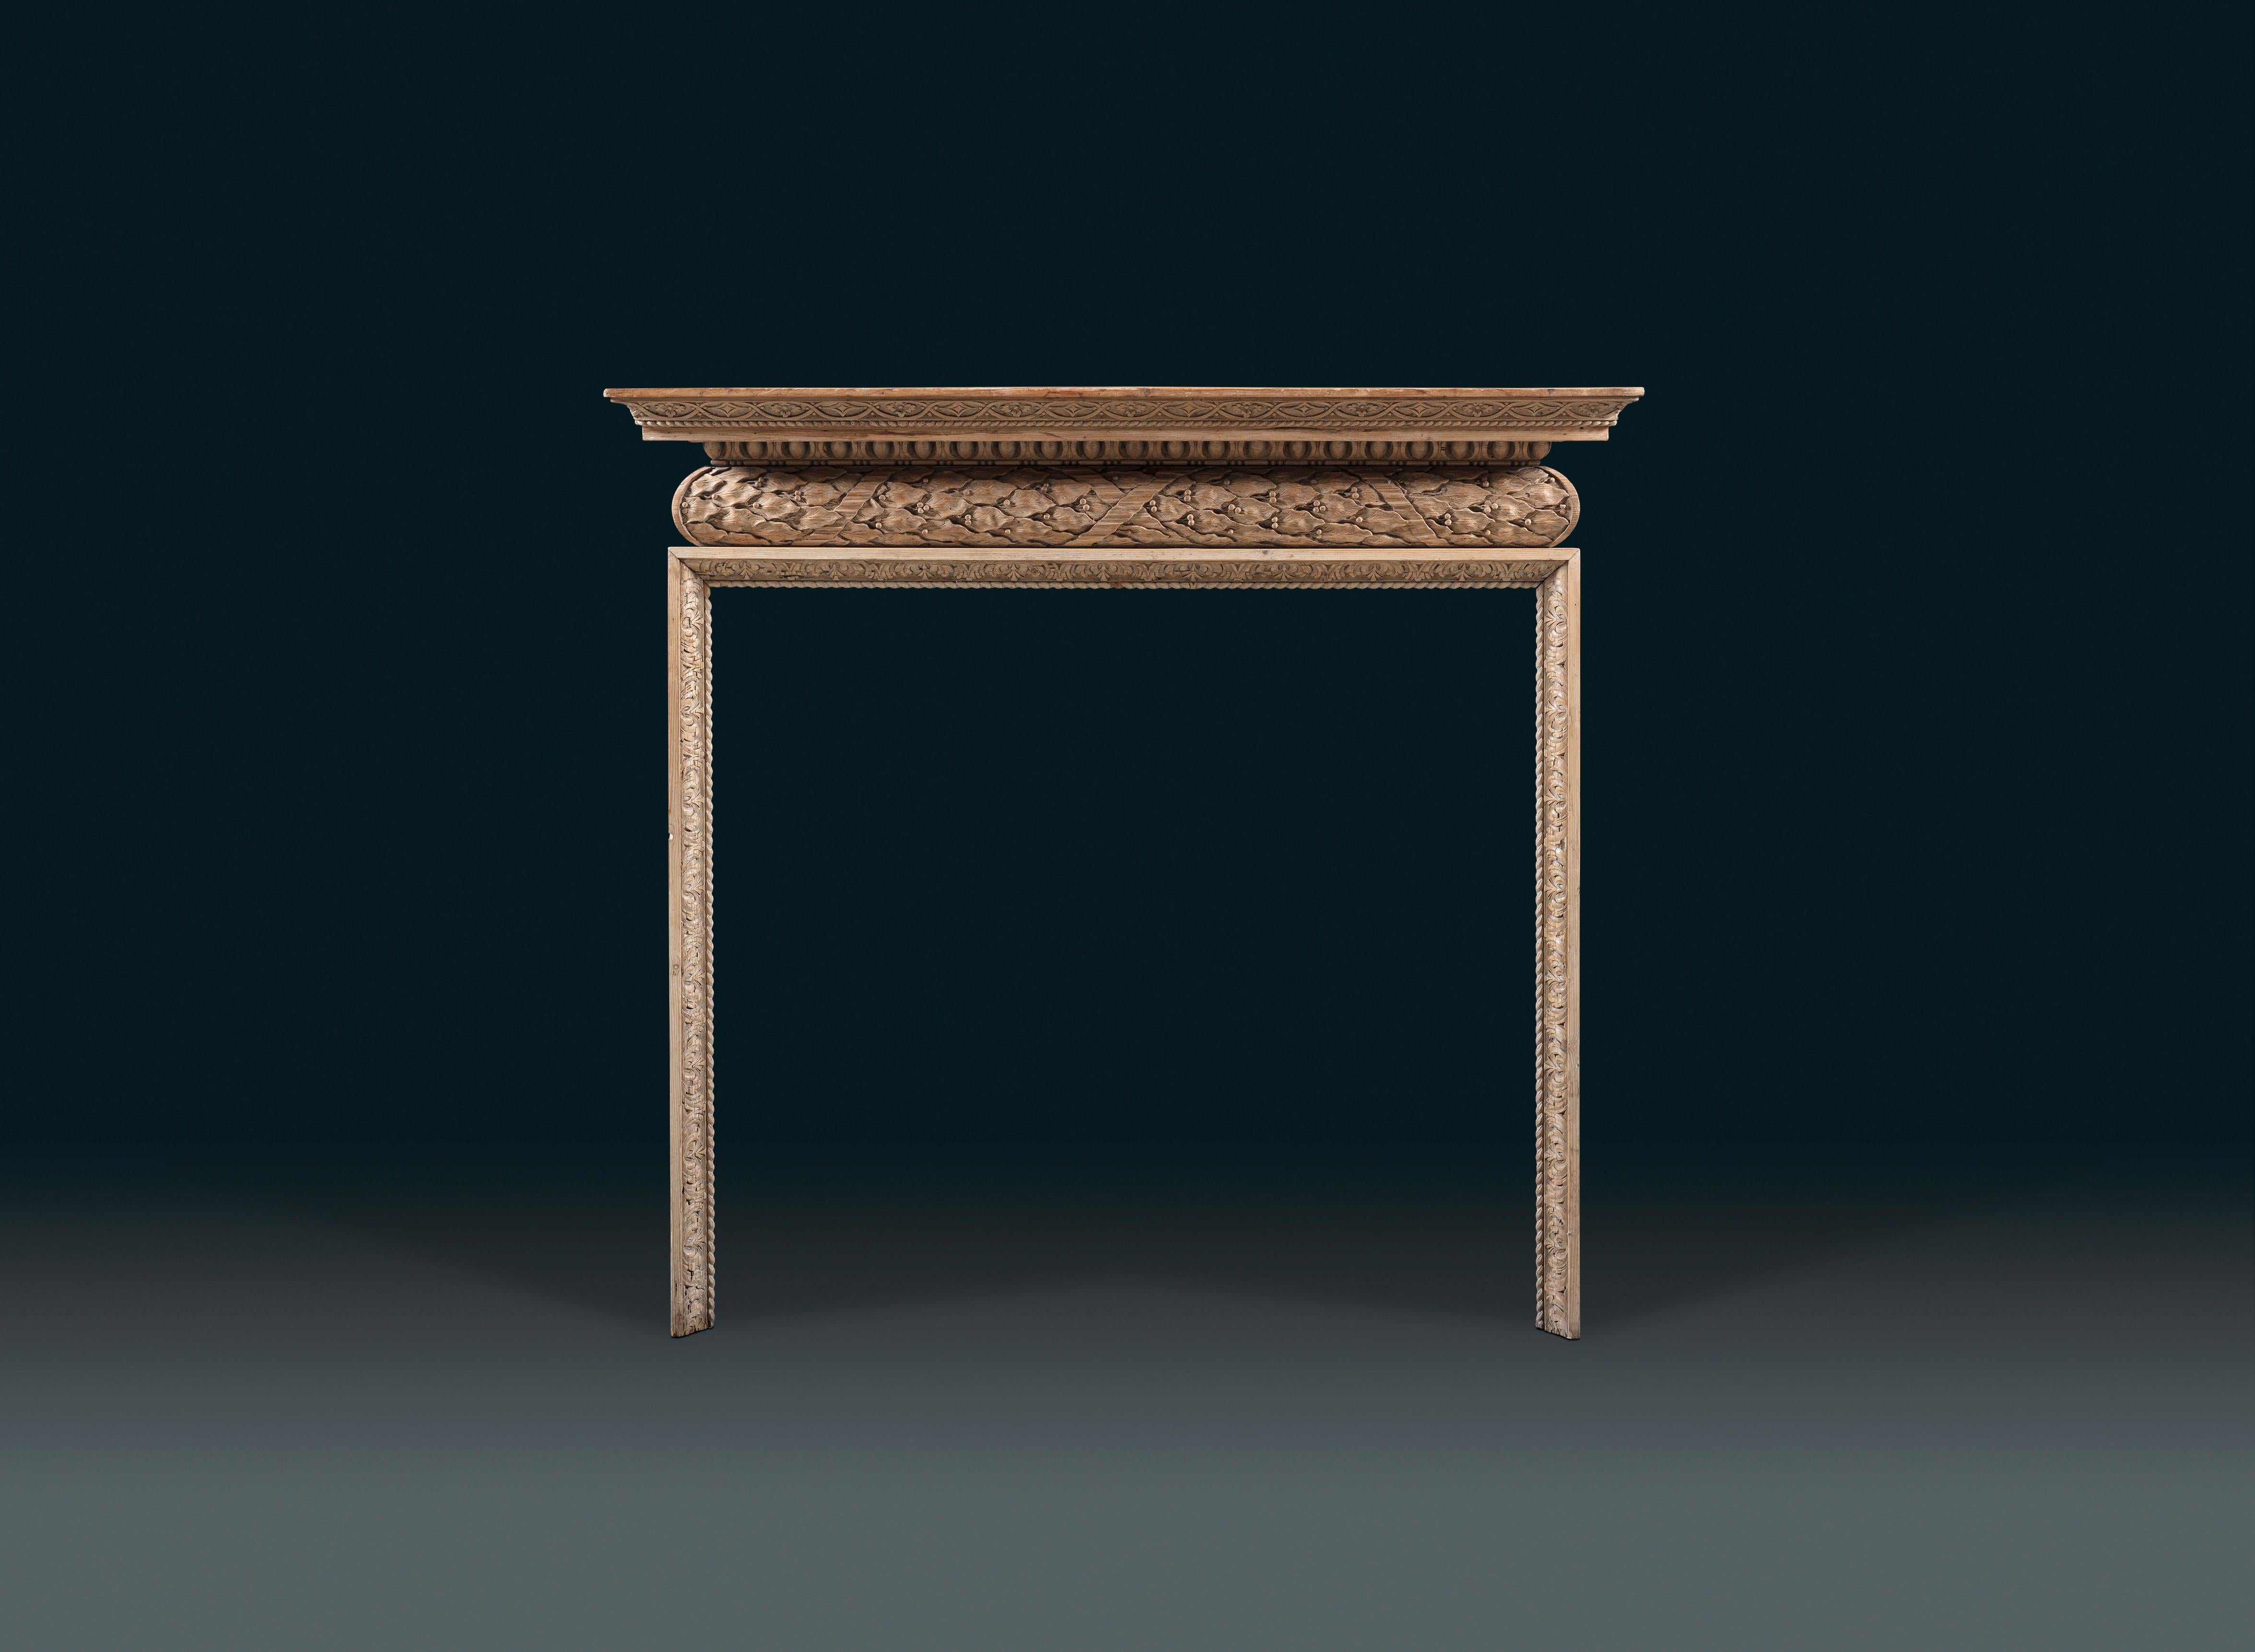 A mid-18th century carved pine chimneypiece, the moulded shelf richly carved with Egg & Dart, above a barrel frieze carved with running laurel bound in ribbon, unusually running left – to – right rather than symmetrically from the centre.